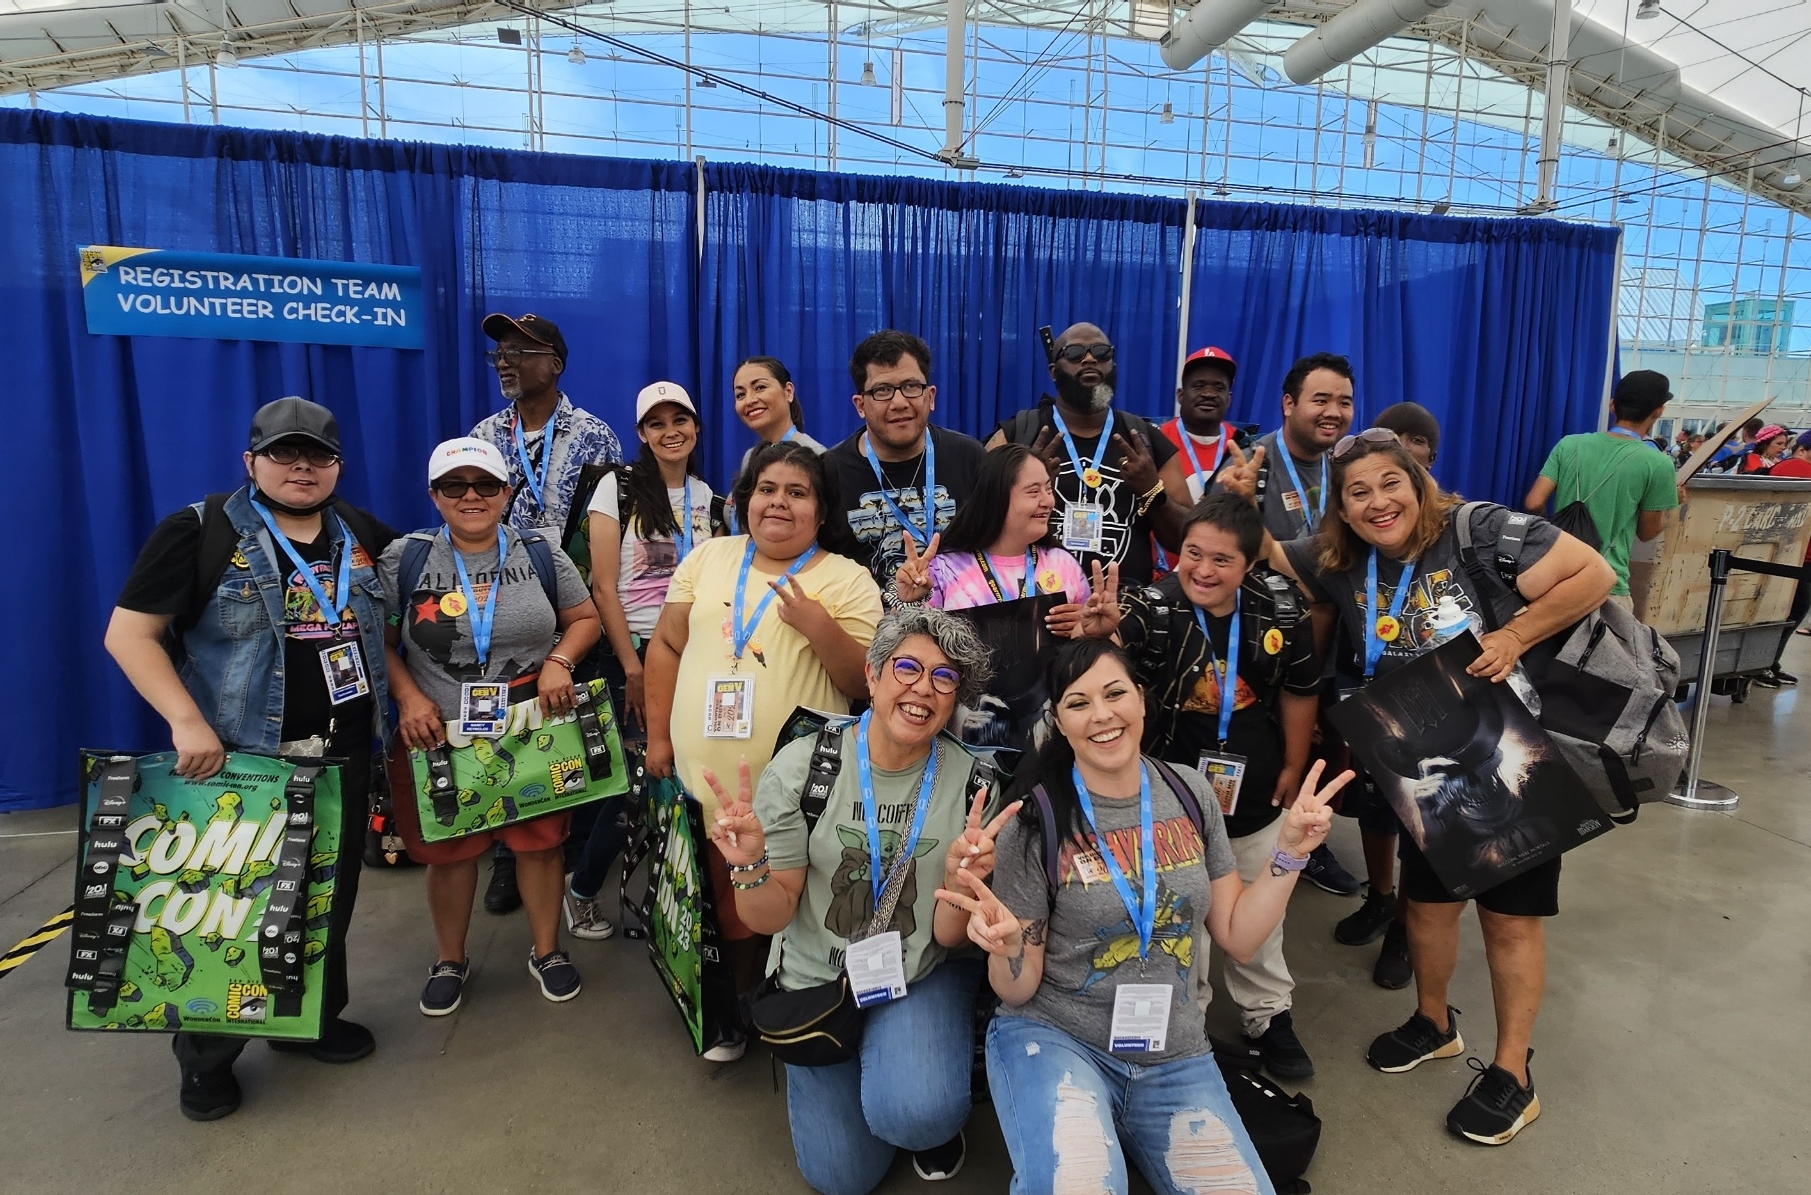 Adult Day Services participants grouped together at ComicCon